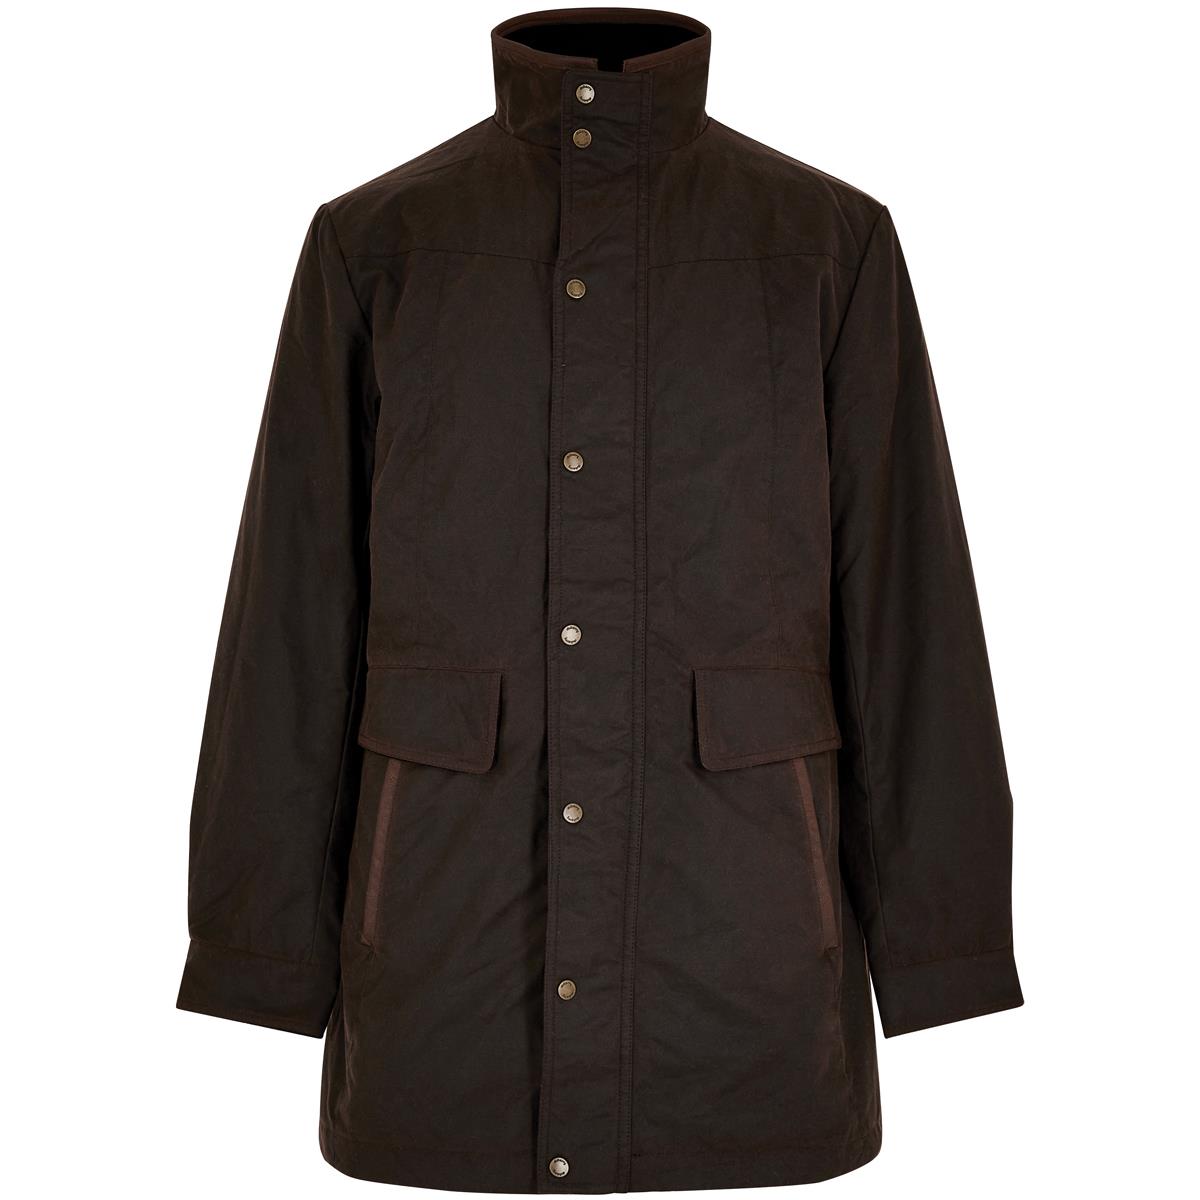 Dubarry Mens Chalkhill Jacket Questions & Answers